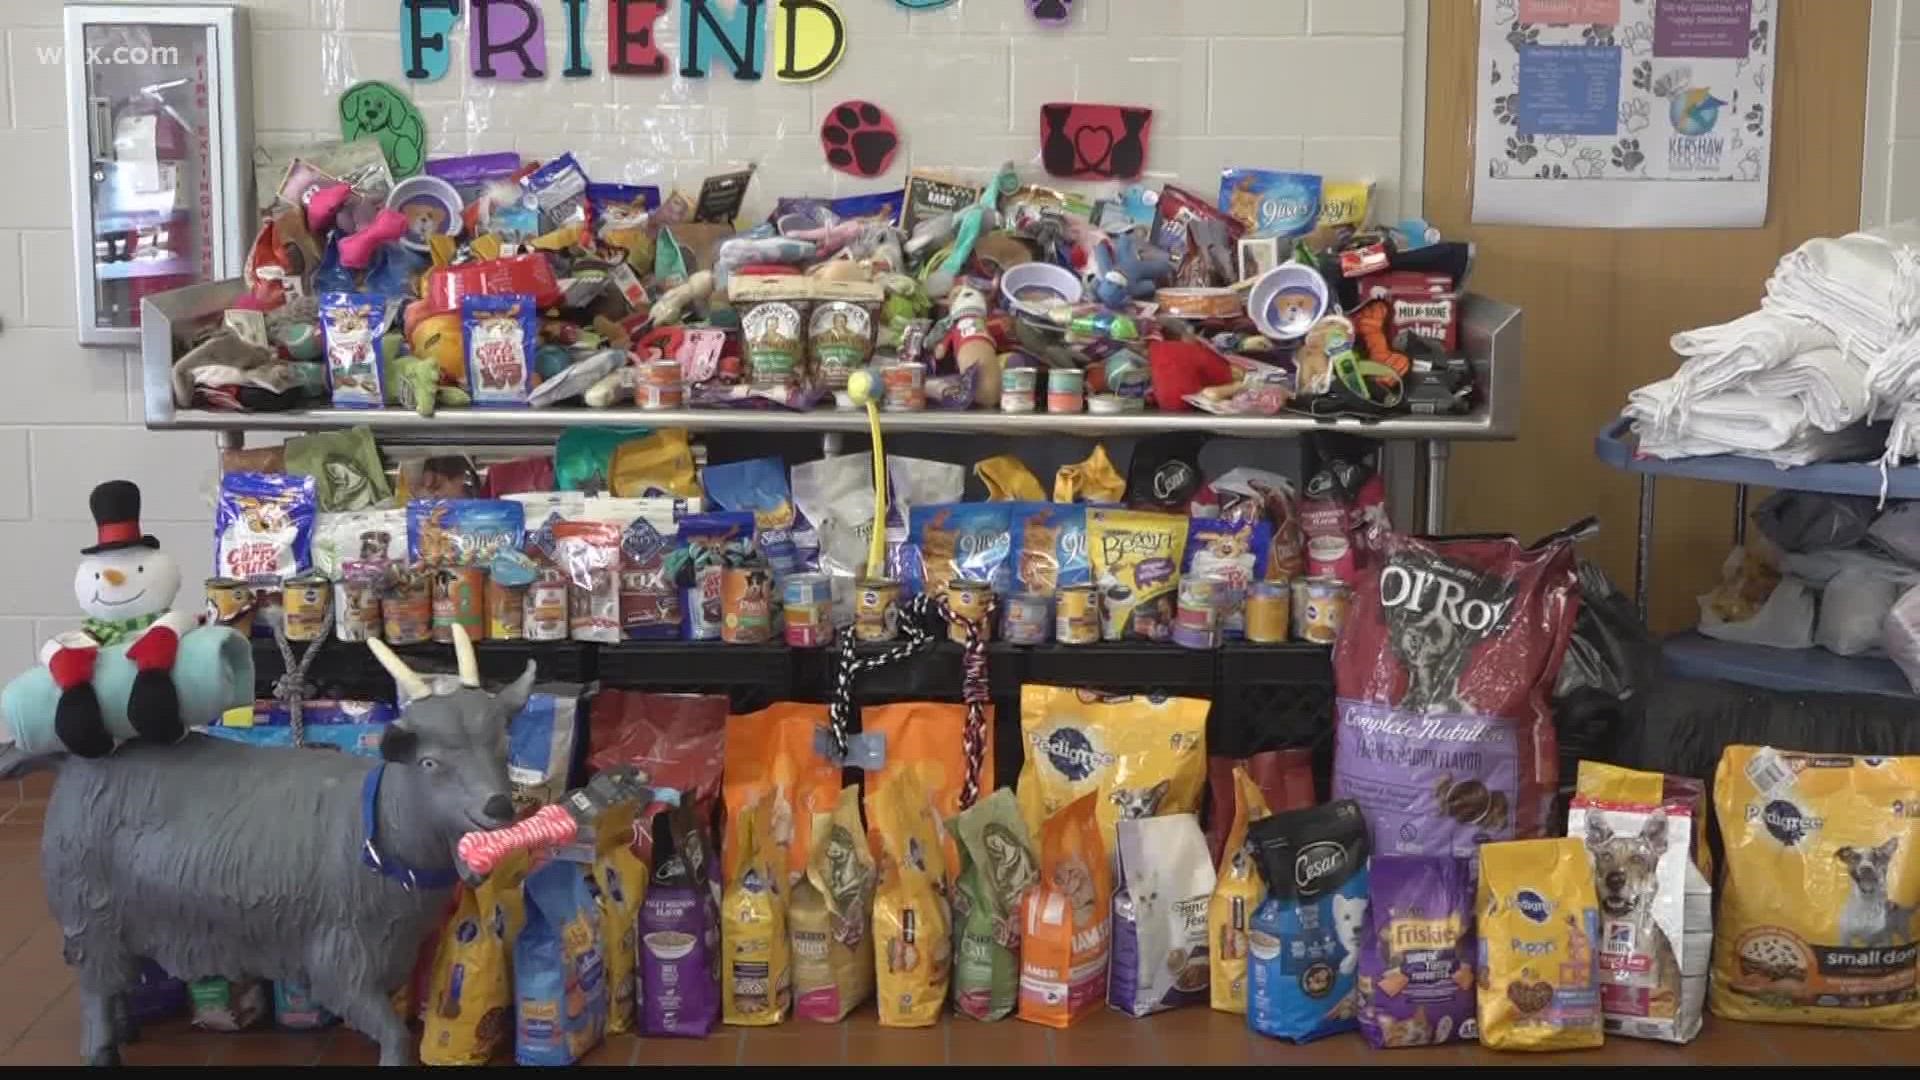 Each school picks their own rescue and raises food/money/items for the Humane Society.